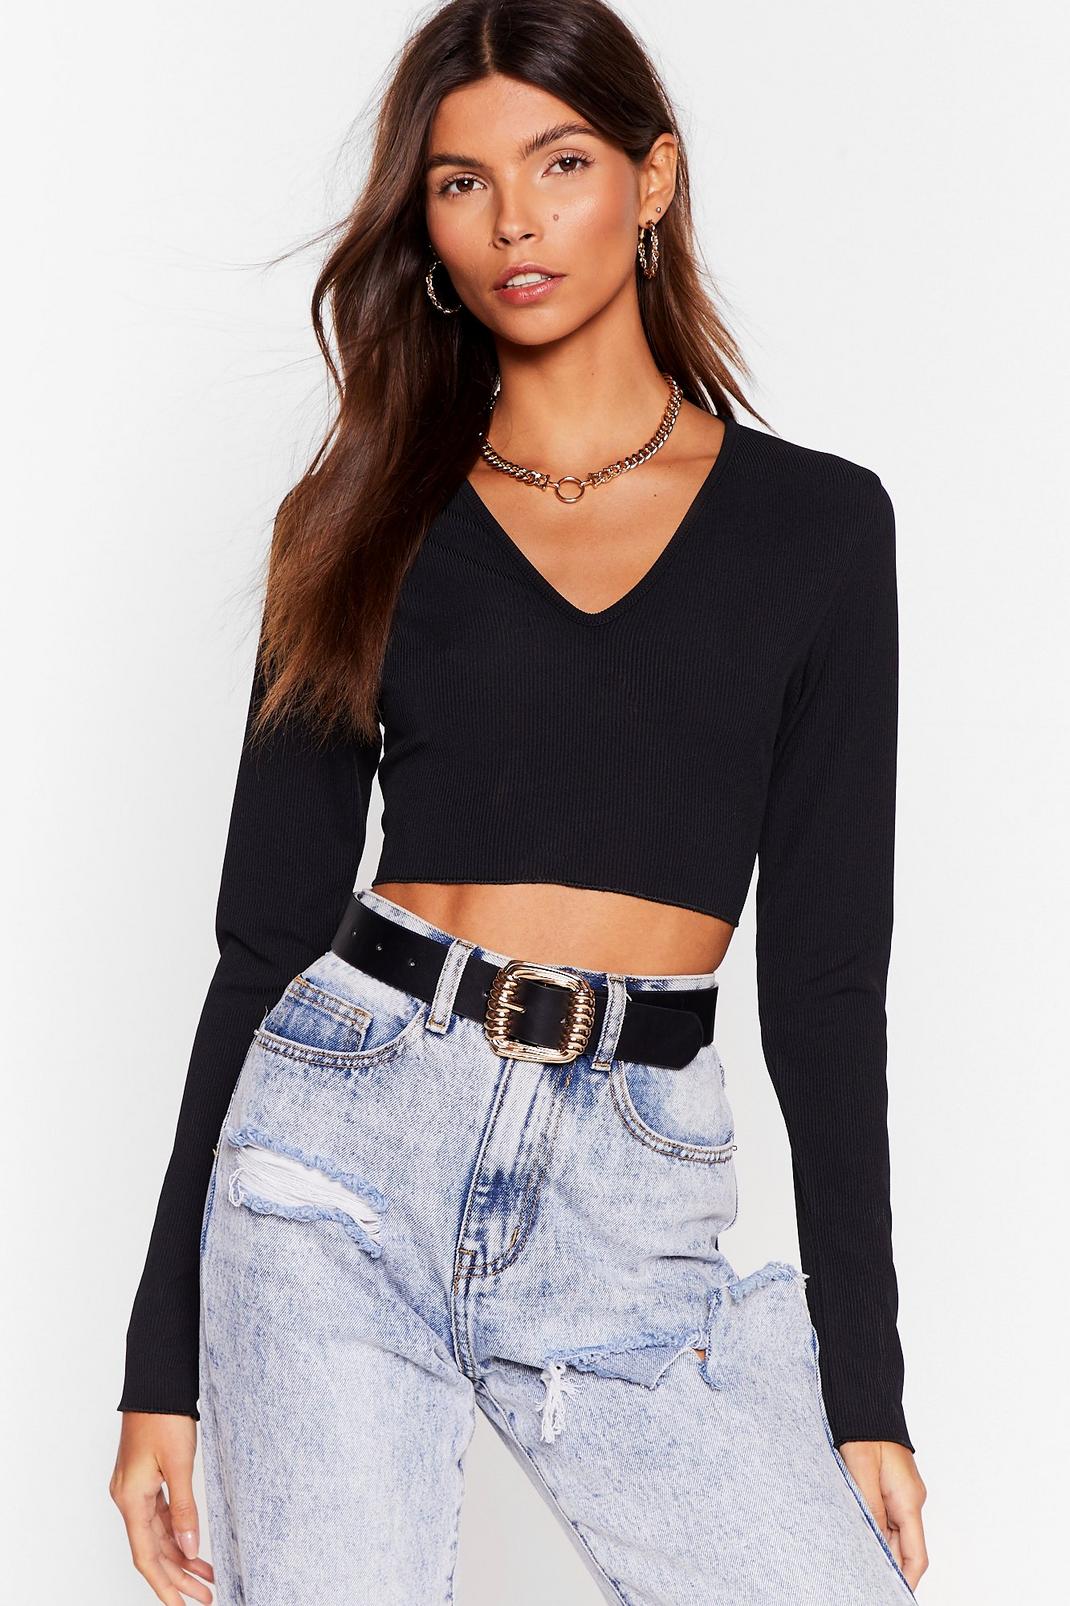 V Know the Score Ribbed Crop Top | Nasty Gal